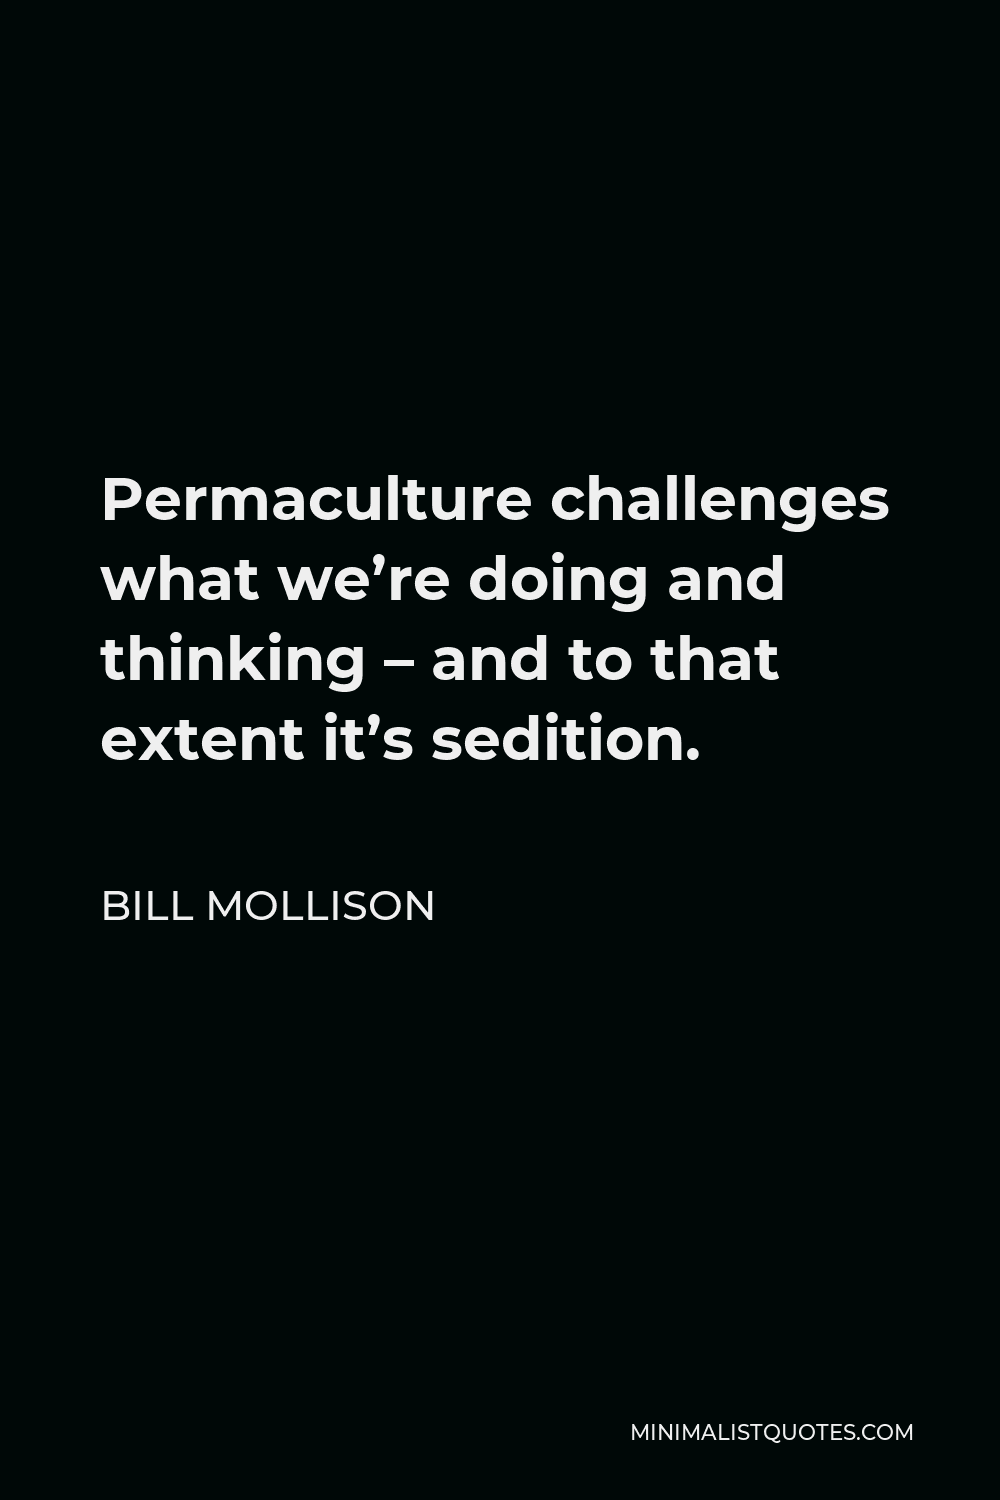 Bill Mollison Quote - Permaculture challenges what we’re doing and thinking – and to that extent it’s sedition.